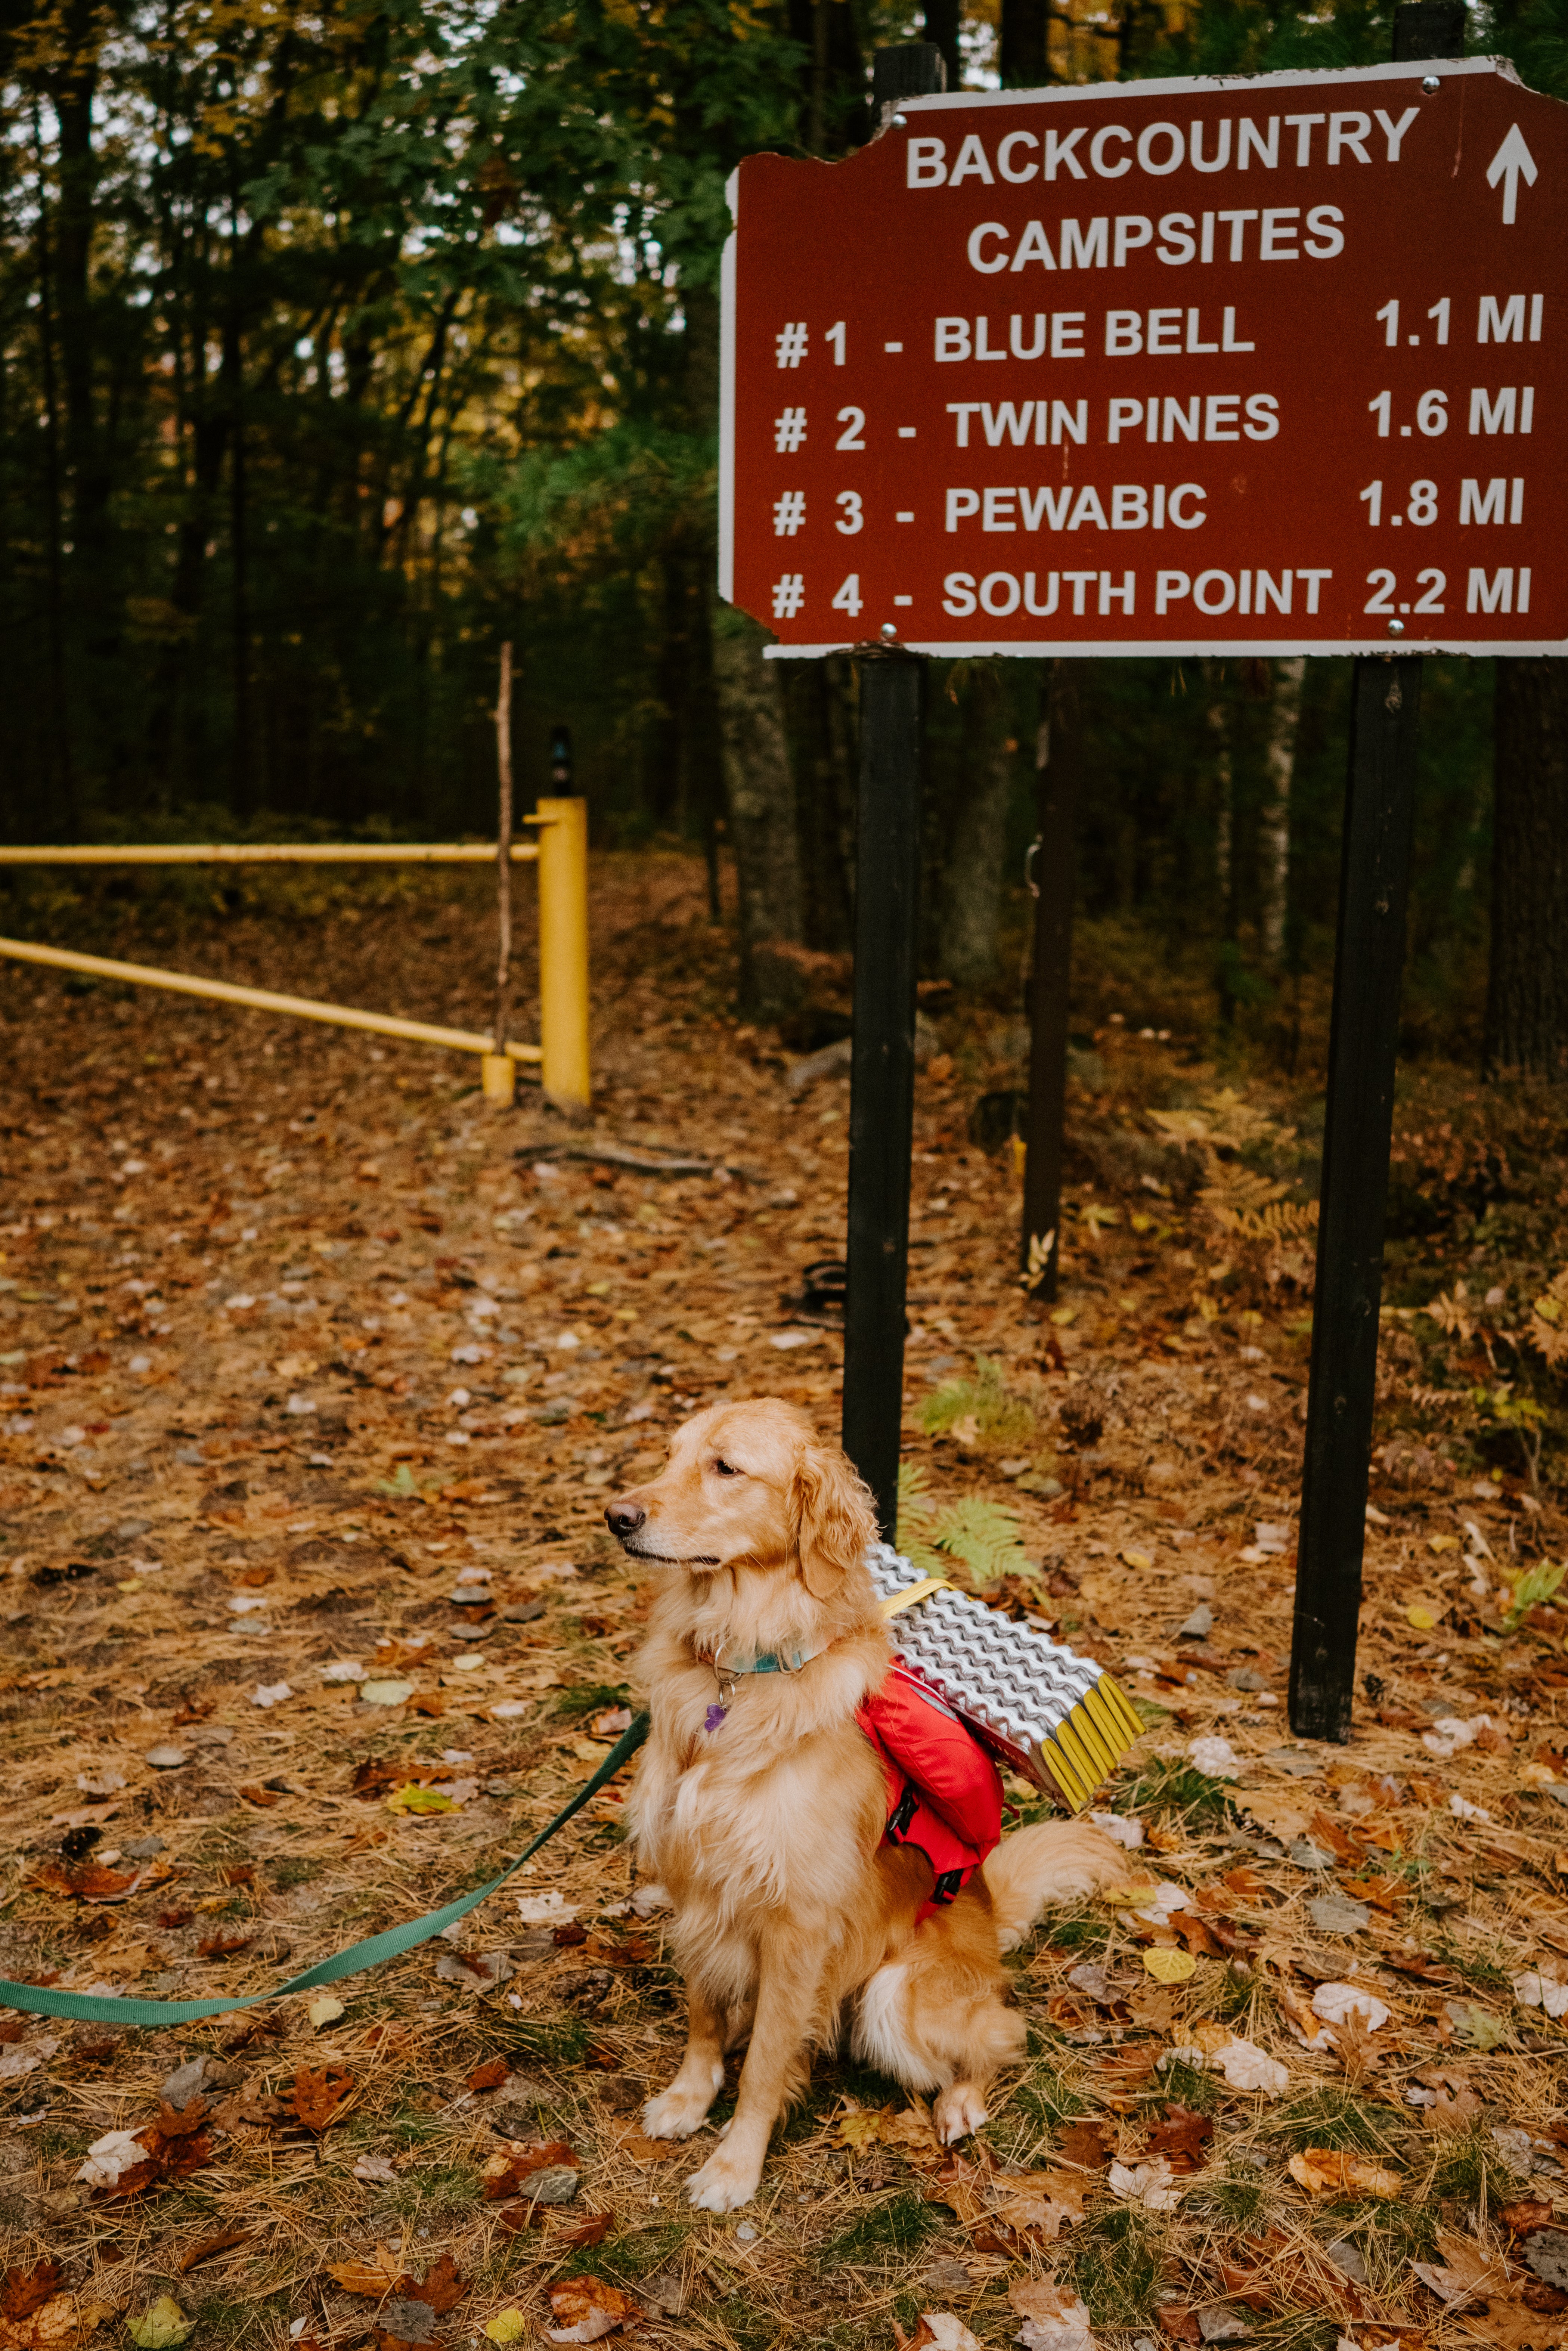 Entry to the trails showing the distances to each campsite.